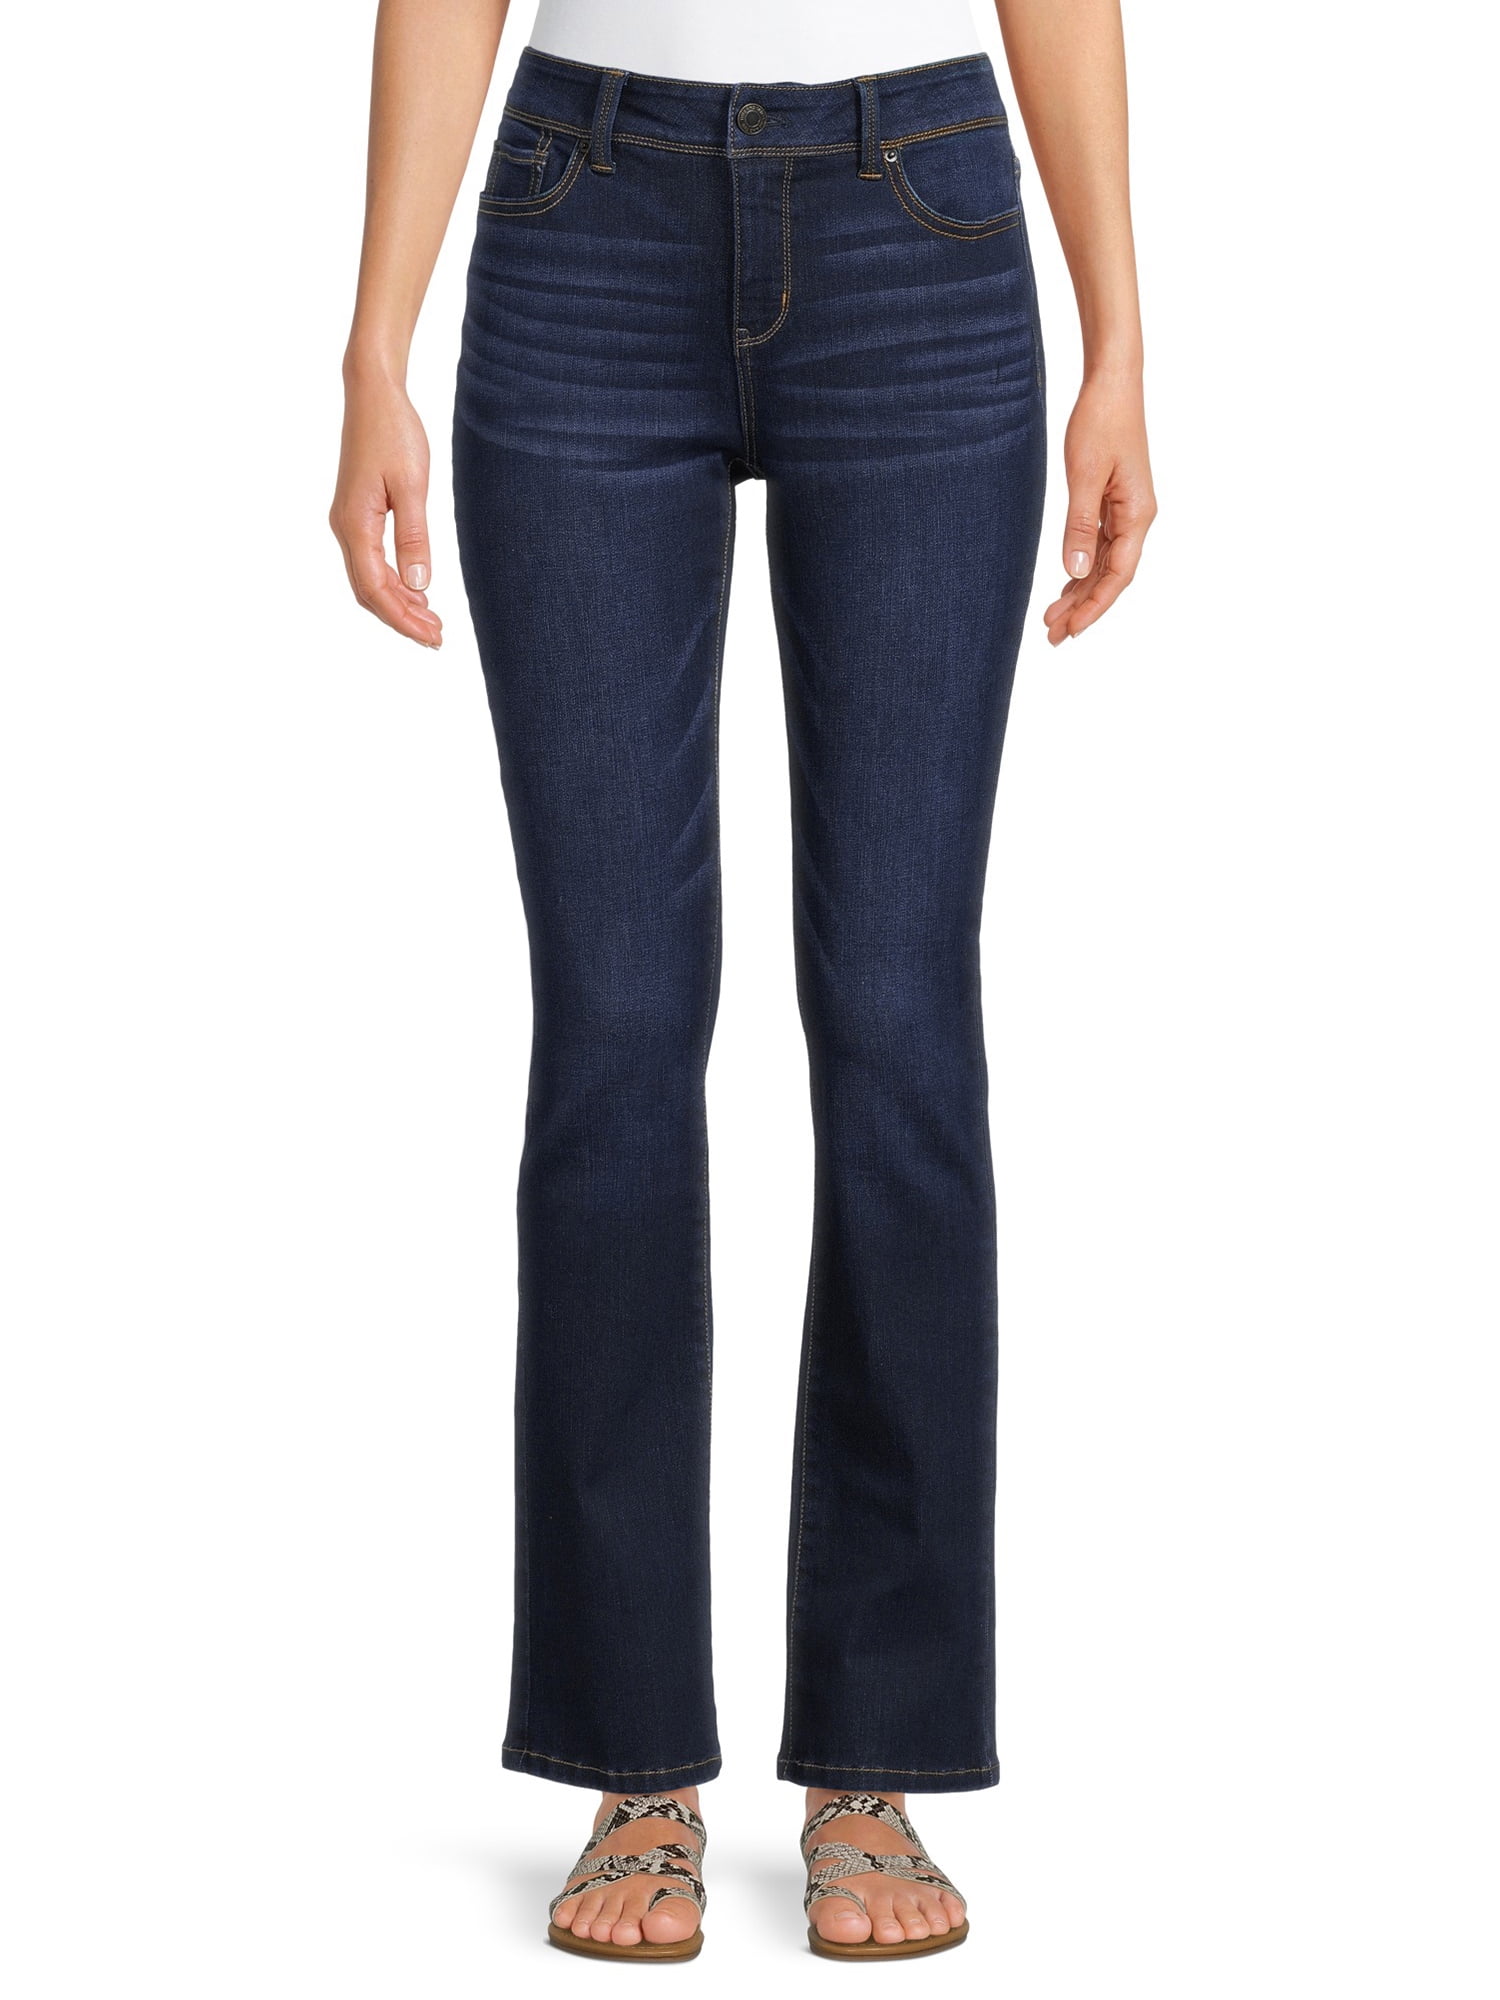 Buy Time and Tru Women's Mid Rise Slim Boot Jeans Online at Lowest ...